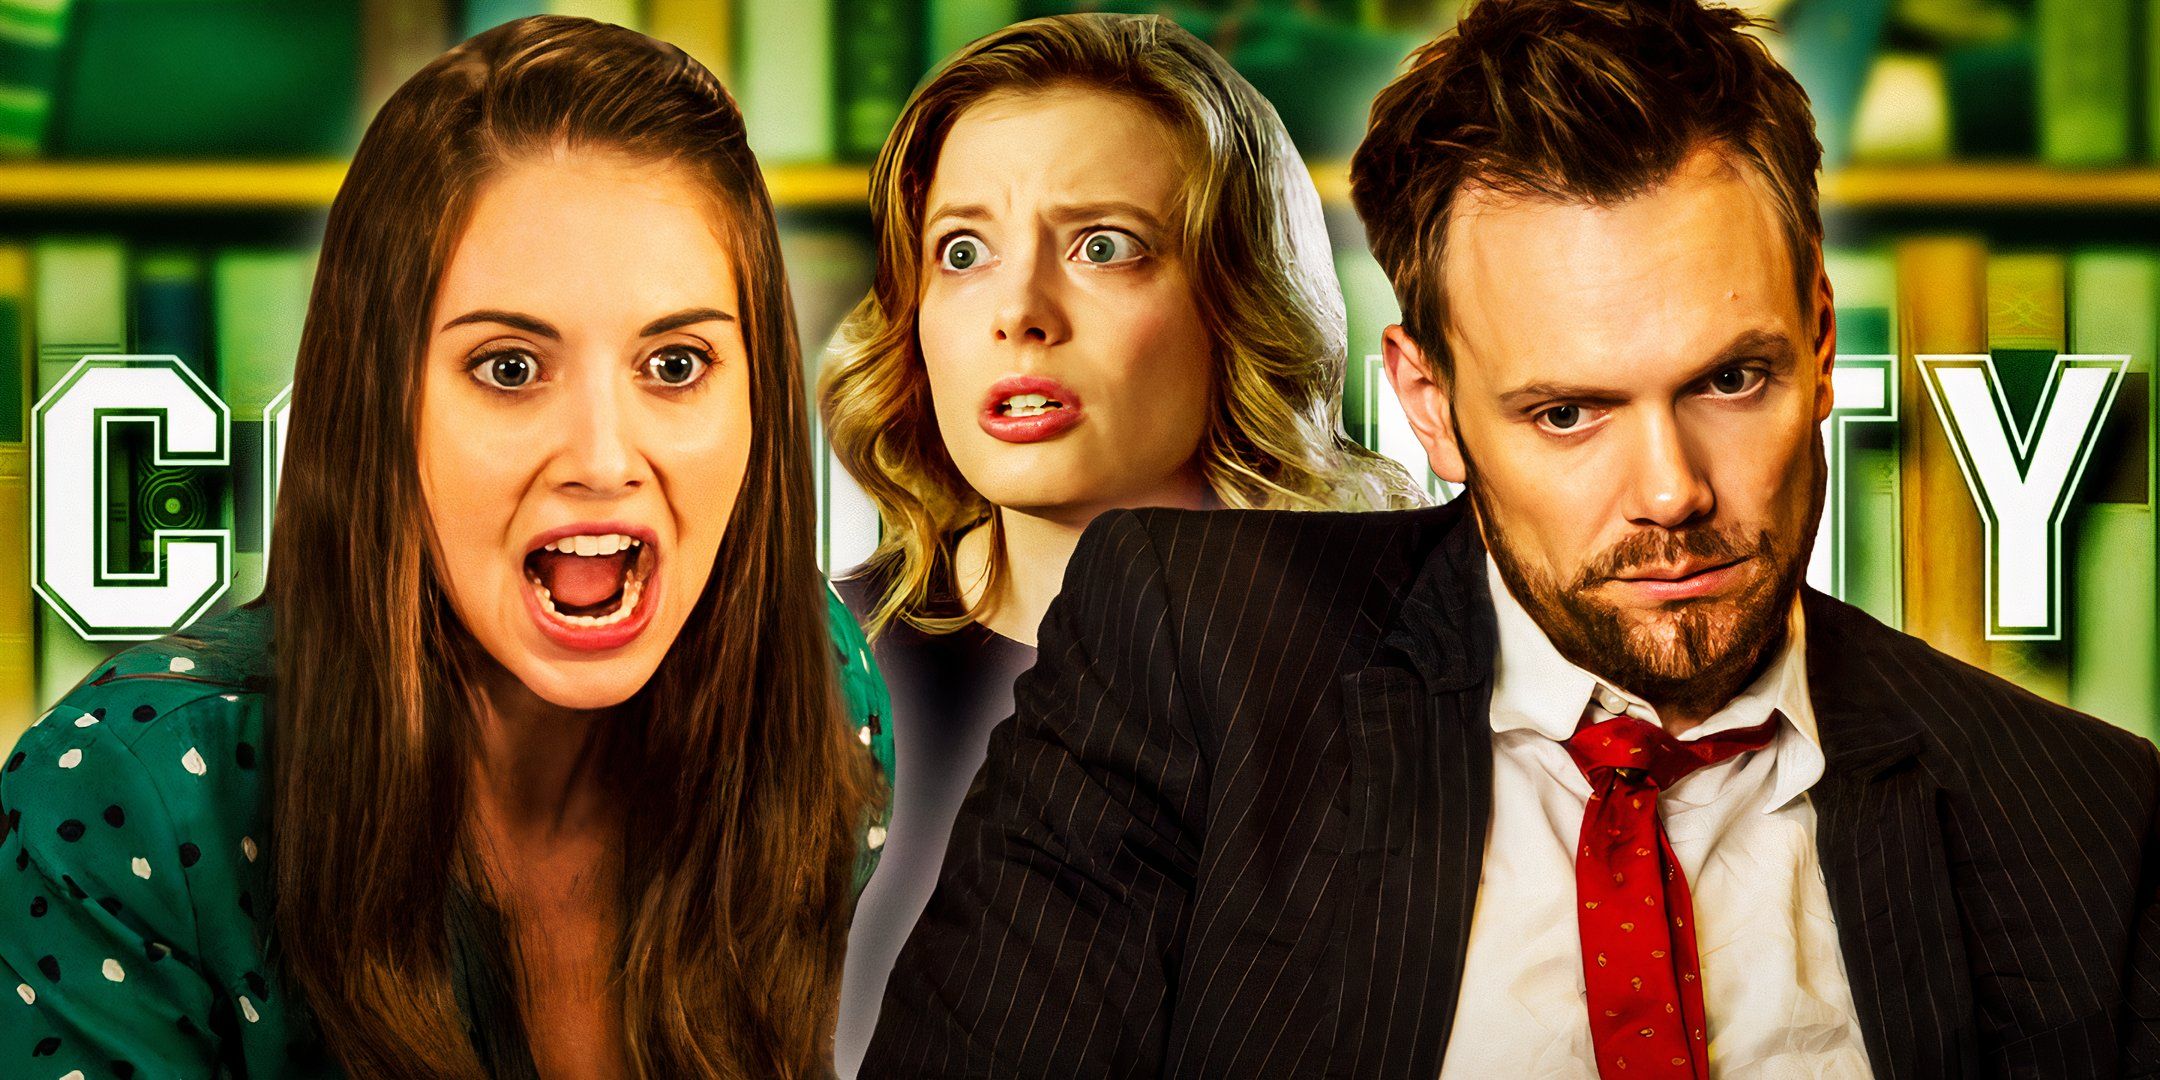 10 Community Moments That Made Viewers Quit The Show